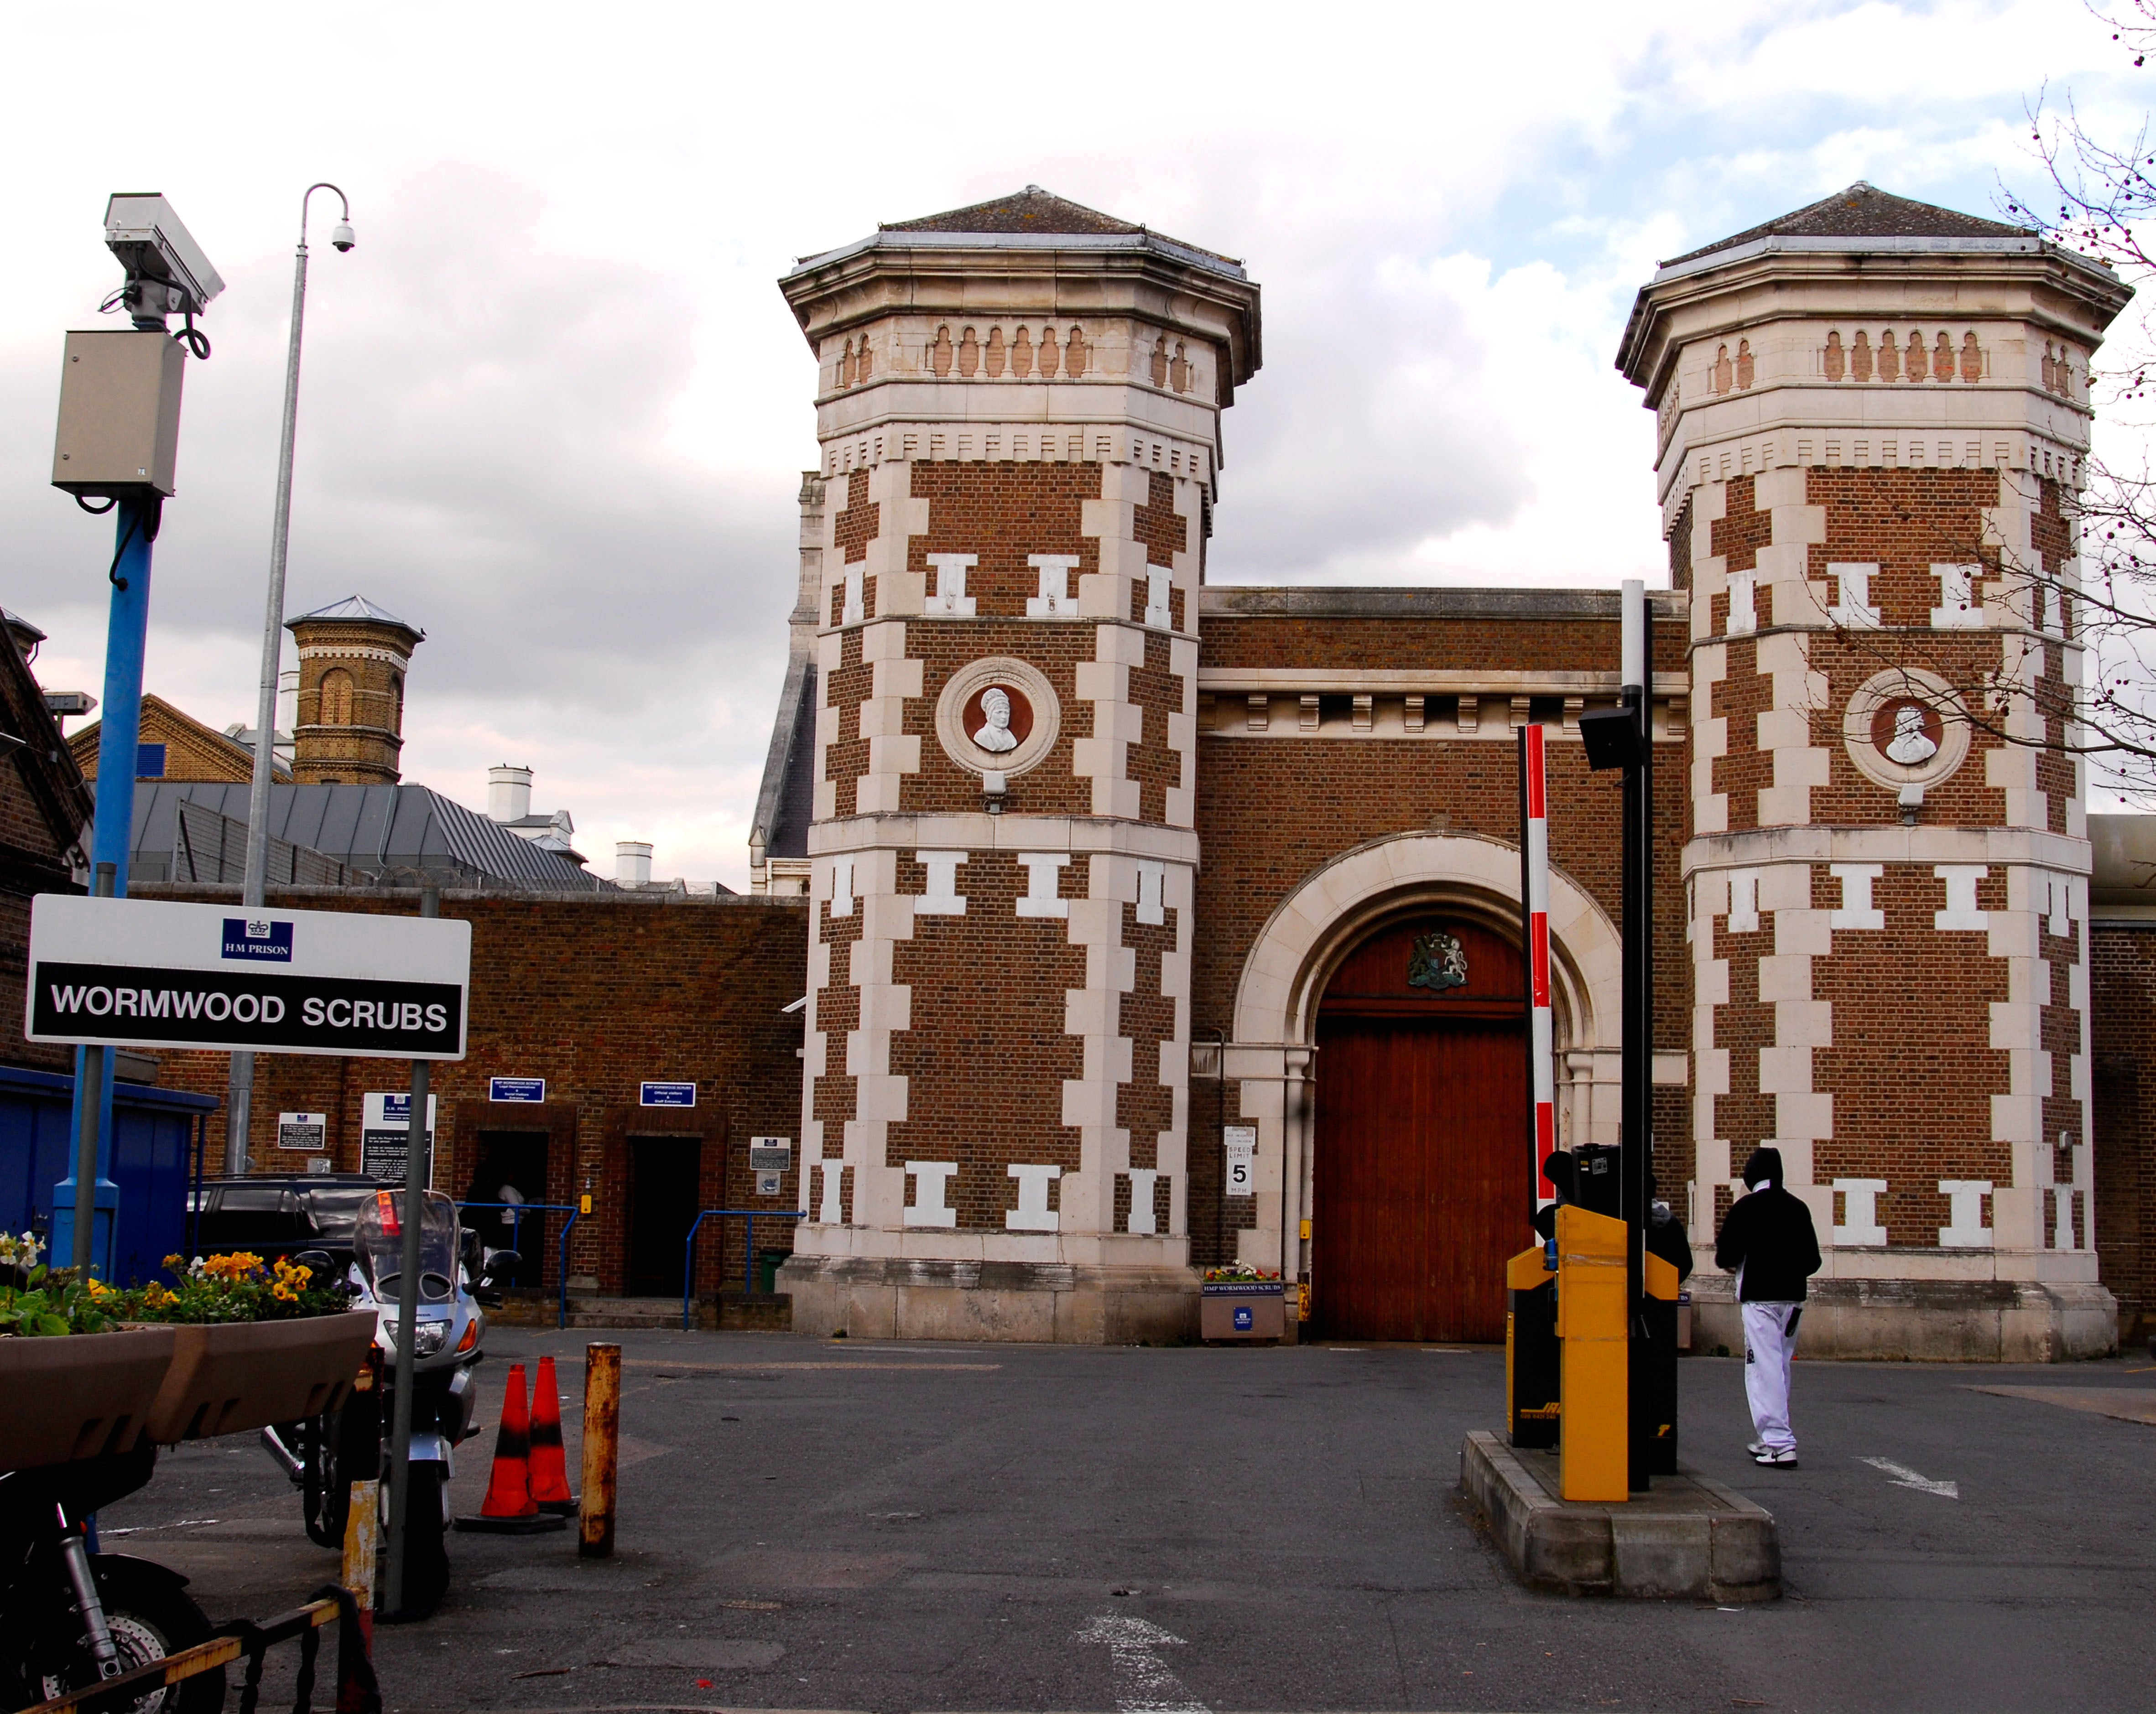 Wormwood Scrubs has housed several of Britain’s worst criminals